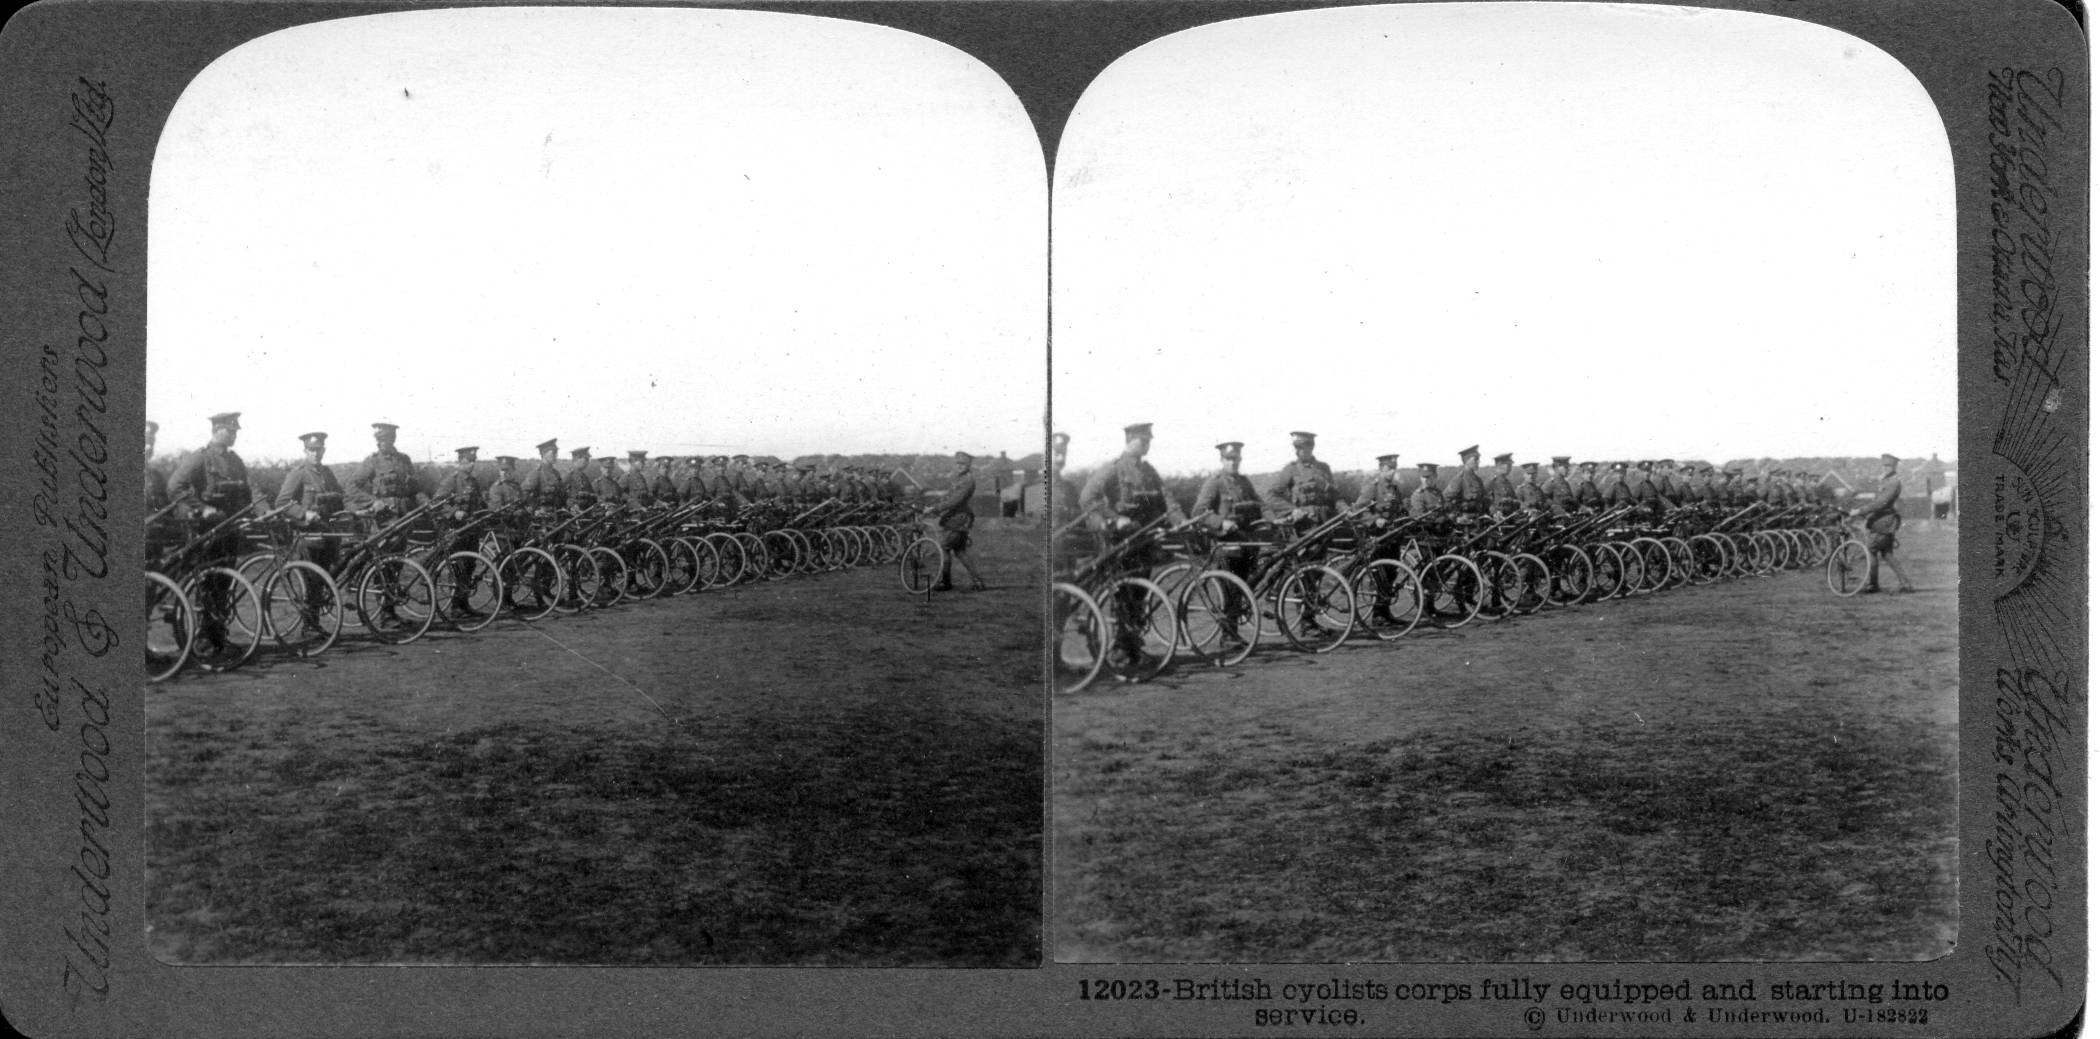 British cyclists corps fully equipped and starting into service